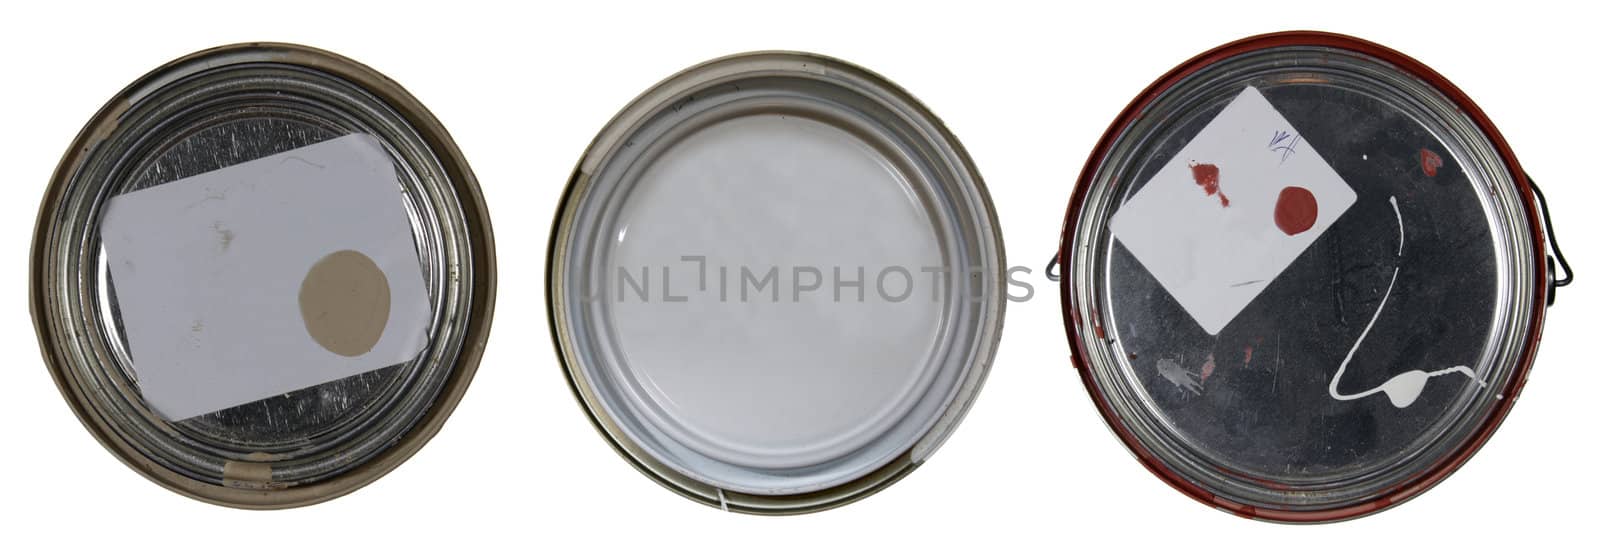 The tops of three paint cans isolated on white with copy space for text.
